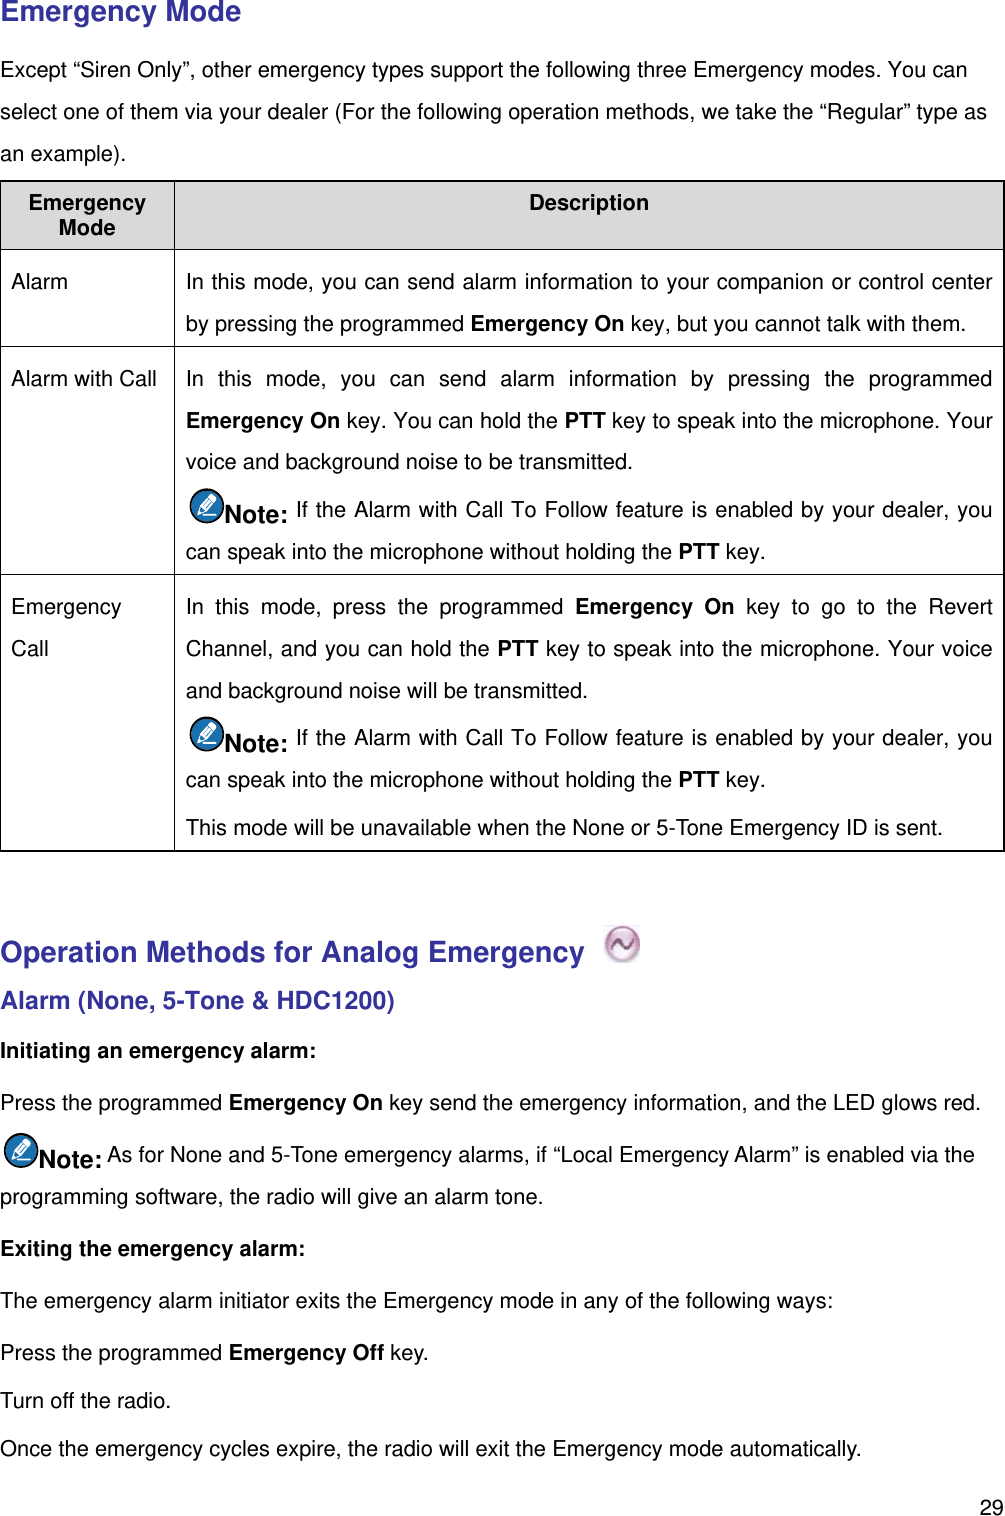   29Emergency Mode Except “Siren Only”, other emergency types support the following three Emergency modes. You can select one of them via your dealer (For the following operation methods, we take the “Regular” type as an example). Emergency Mode Description Alarm    In this mode, you can send alarm information to your companion or control center by pressing the programmed Emergency On key, but you cannot talk with them. Alarm with Call   In this mode, you can send alarm information by pressing the programmed Emergency On key. You can hold the PTT key to speak into the microphone. Your voice and background noise to be transmitted.   Note: If the Alarm with Call To Follow feature is enabled by your dealer, you can speak into the microphone without holding the PTT key.   Emergency Call In this mode, press the programmed Emergency On key to go to the Revert Channel, and you can hold the PTT key to speak into the microphone. Your voice and background noise will be transmitted.   Note: If the Alarm with Call To Follow feature is enabled by your dealer, you can speak into the microphone without holding the PTT key.   This mode will be unavailable when the None or 5-Tone Emergency ID is sent.    Operation Methods for Analog Emergency   Alarm (None, 5-Tone &amp; HDC1200) Initiating an emergency alarm:   Press the programmed Emergency On key send the emergency information, and the LED glows red.   Note: As for None and 5-Tone emergency alarms, if “Local Emergency Alarm” is enabled via the programming software, the radio will give an alarm tone.   Exiting the emergency alarm:   The emergency alarm initiator exits the Emergency mode in any of the following ways: Press the programmed Emergency Off key.   Turn off the radio.   Once the emergency cycles expire, the radio will exit the Emergency mode automatically.   